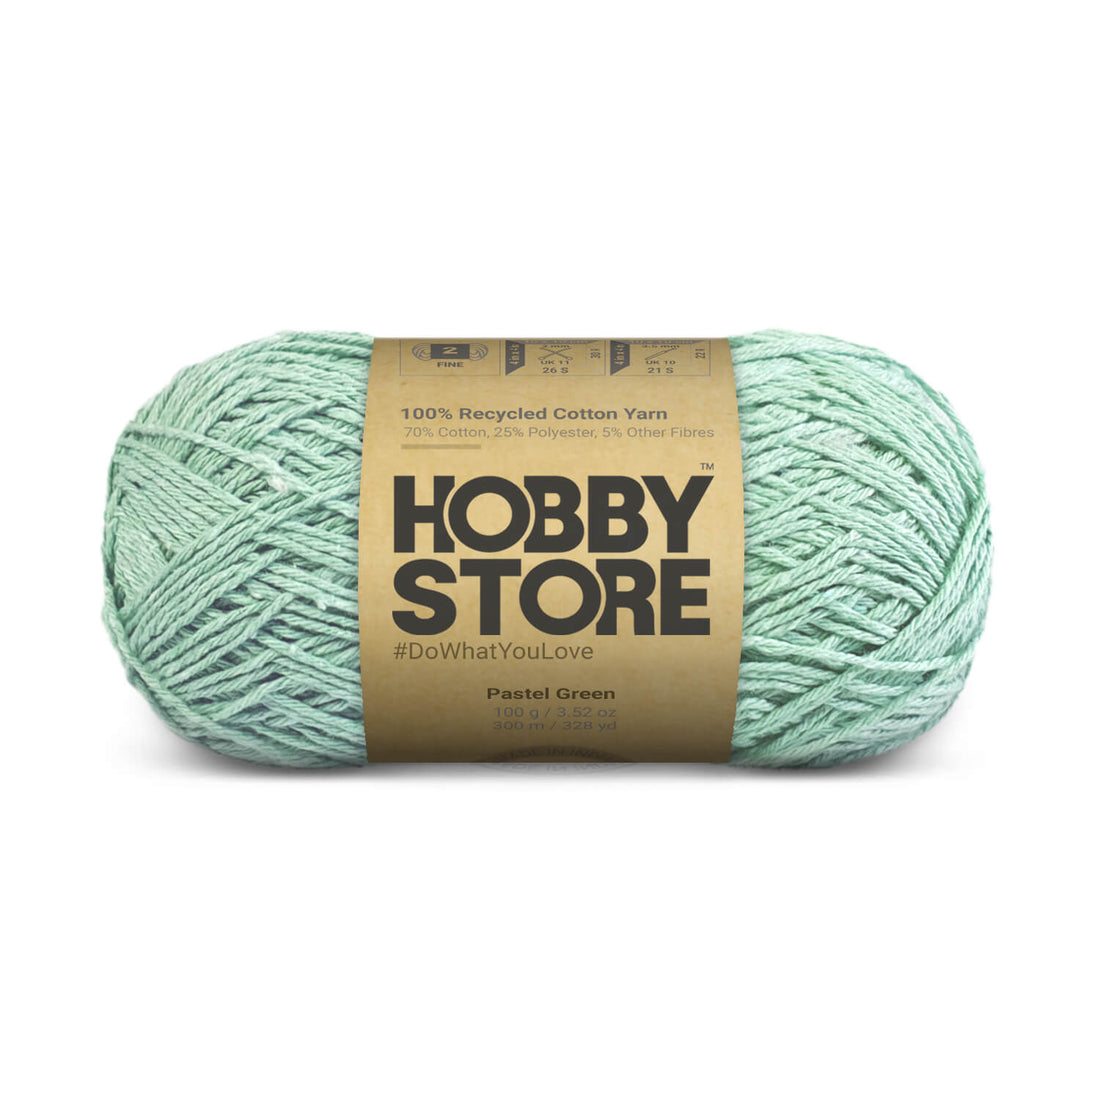 Recycled Cotton Yarn by Hobby Store - Pastel Green 8424